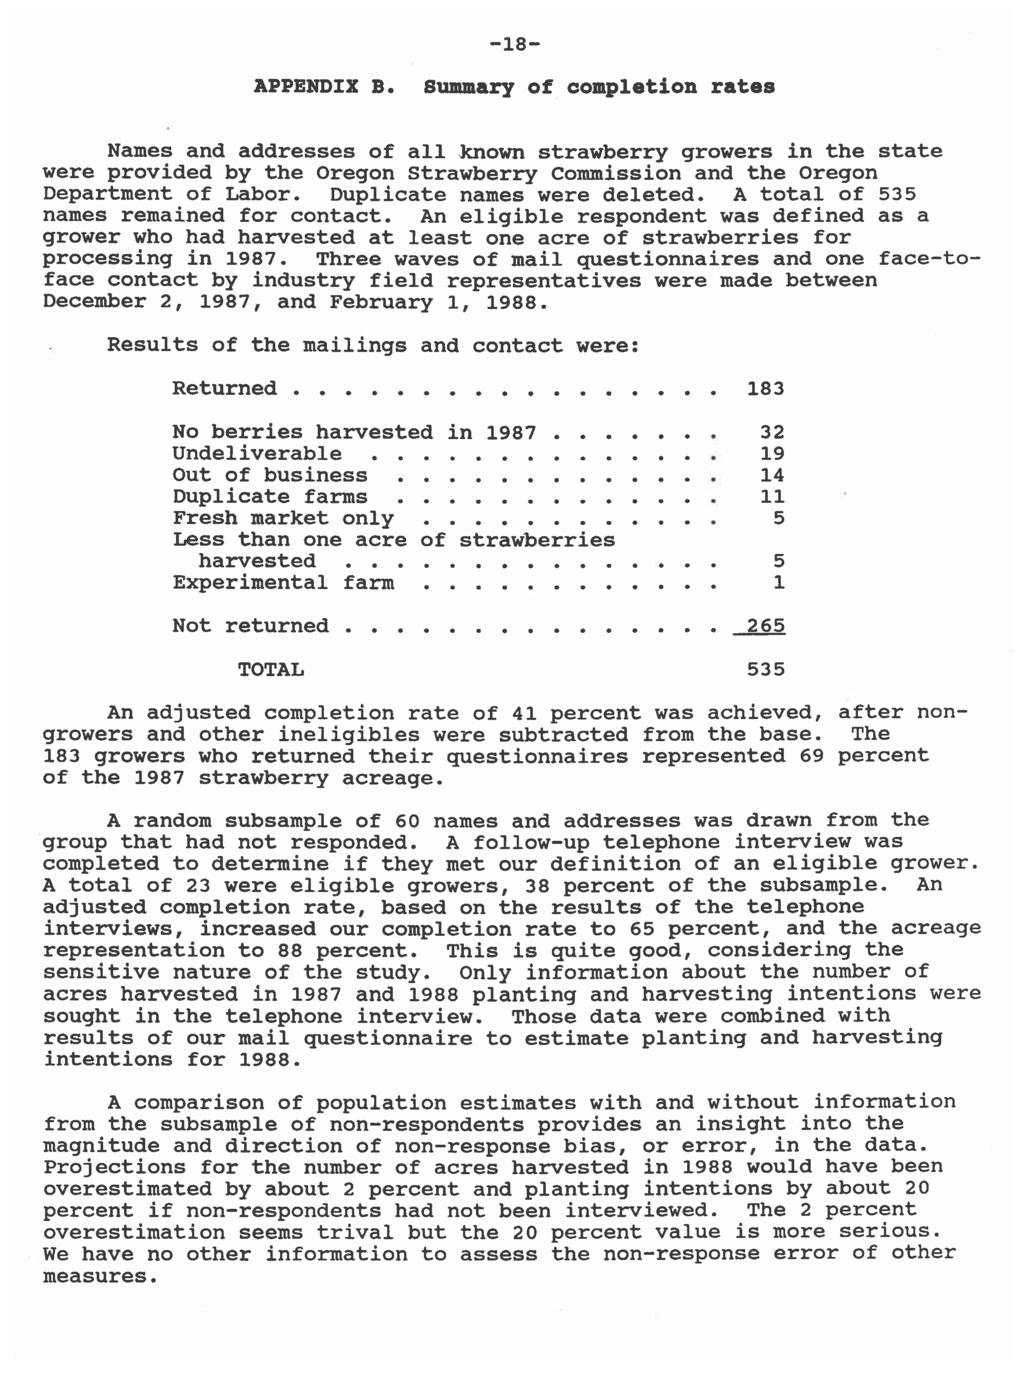 -18- APPENDIX B. Summary of completion rates Names and addresses of all known strawberry growers in the state were provided by the Oregon Strawberry Commission and the Oregon Department of Labor.